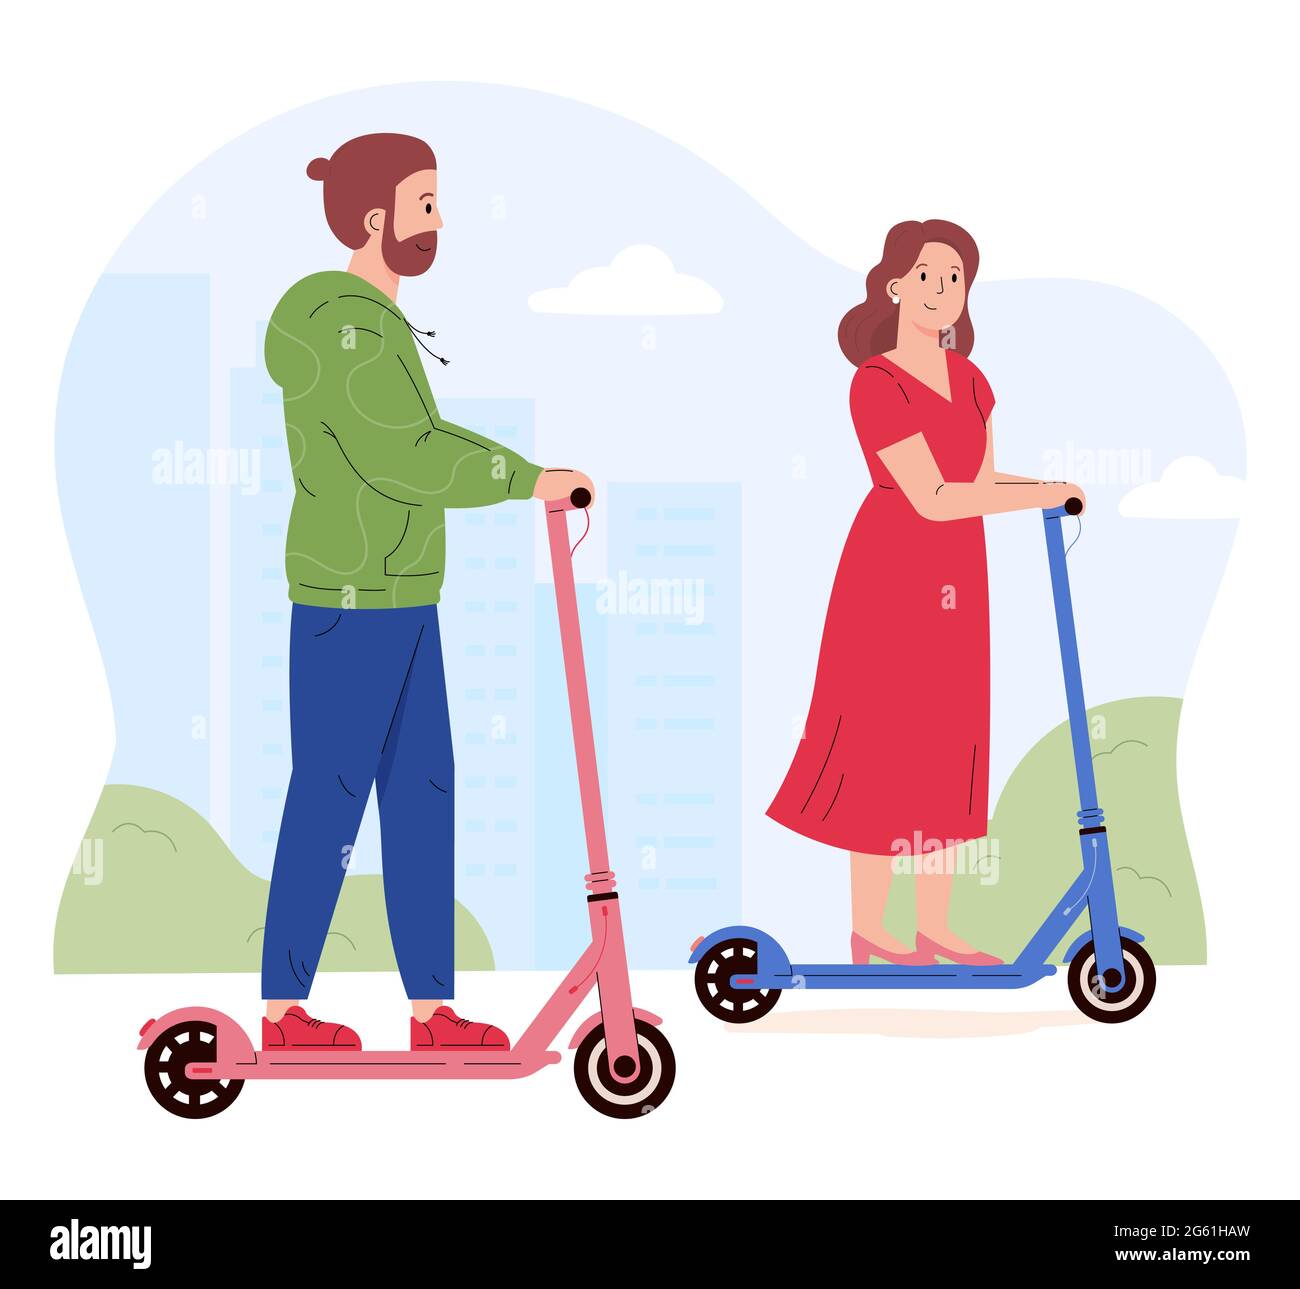 Man and woman riding electric walk scooters. Stock Vector